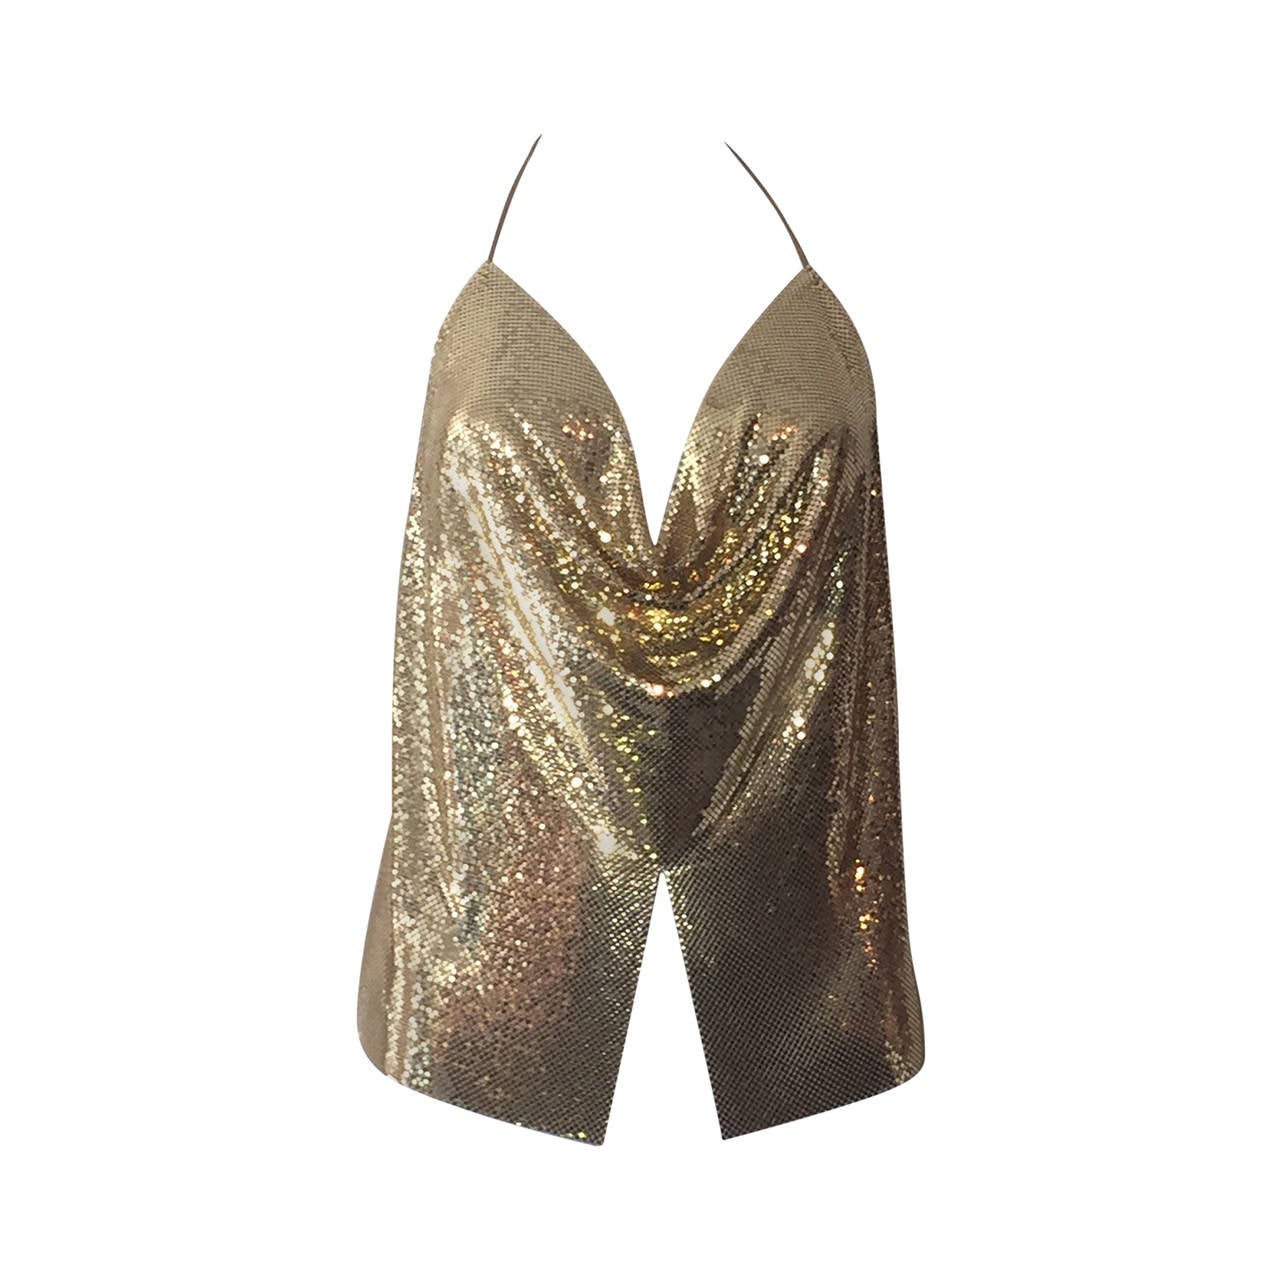 1970s Whiting and Davis Gold-Toned Metal Mesh Halter Top